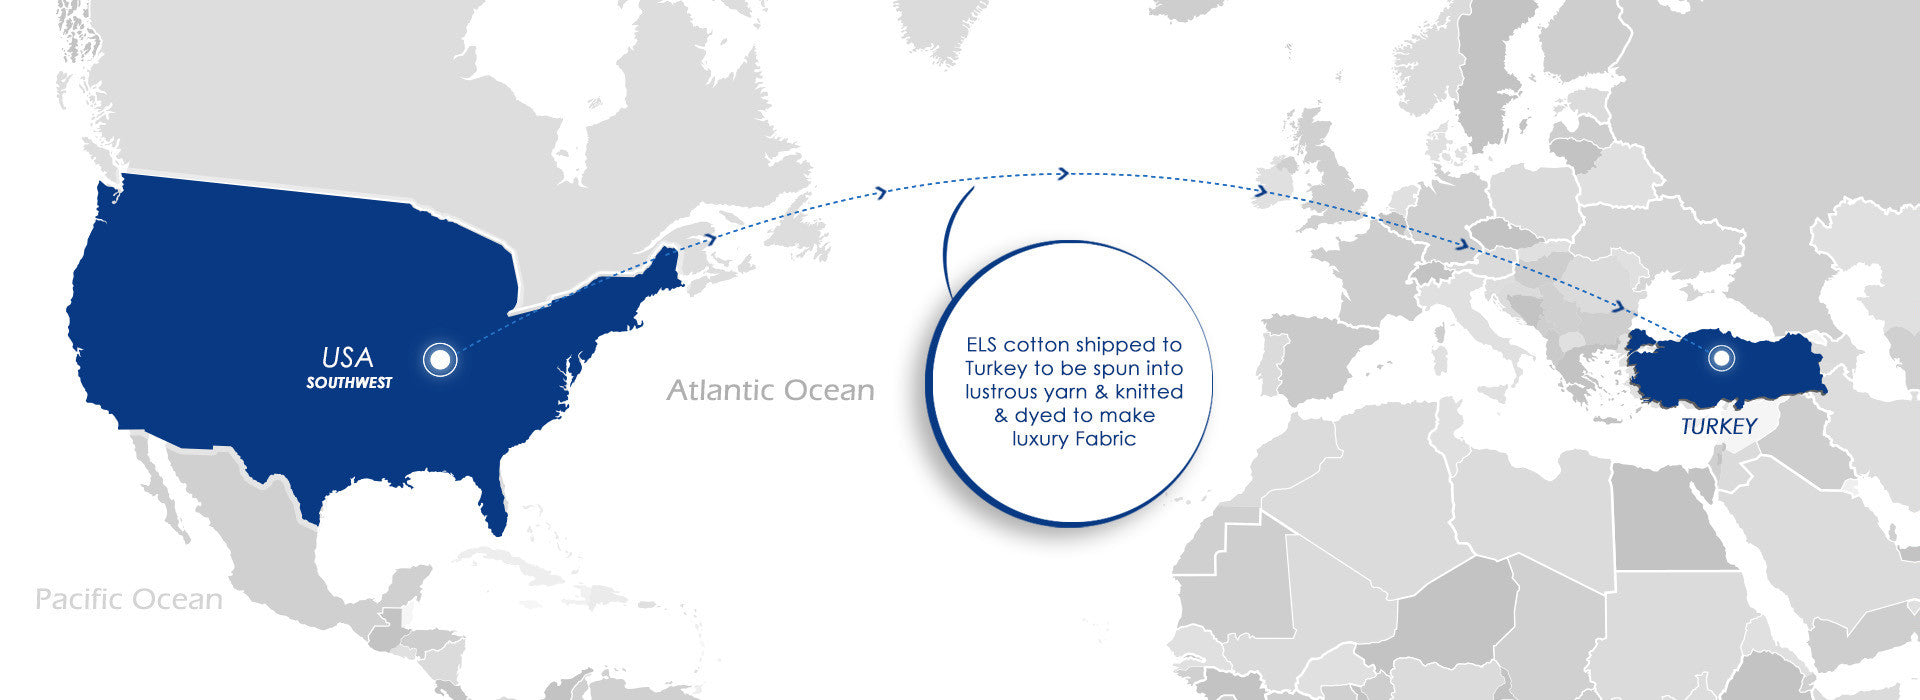 ELS cotton transported from USA to Turkey